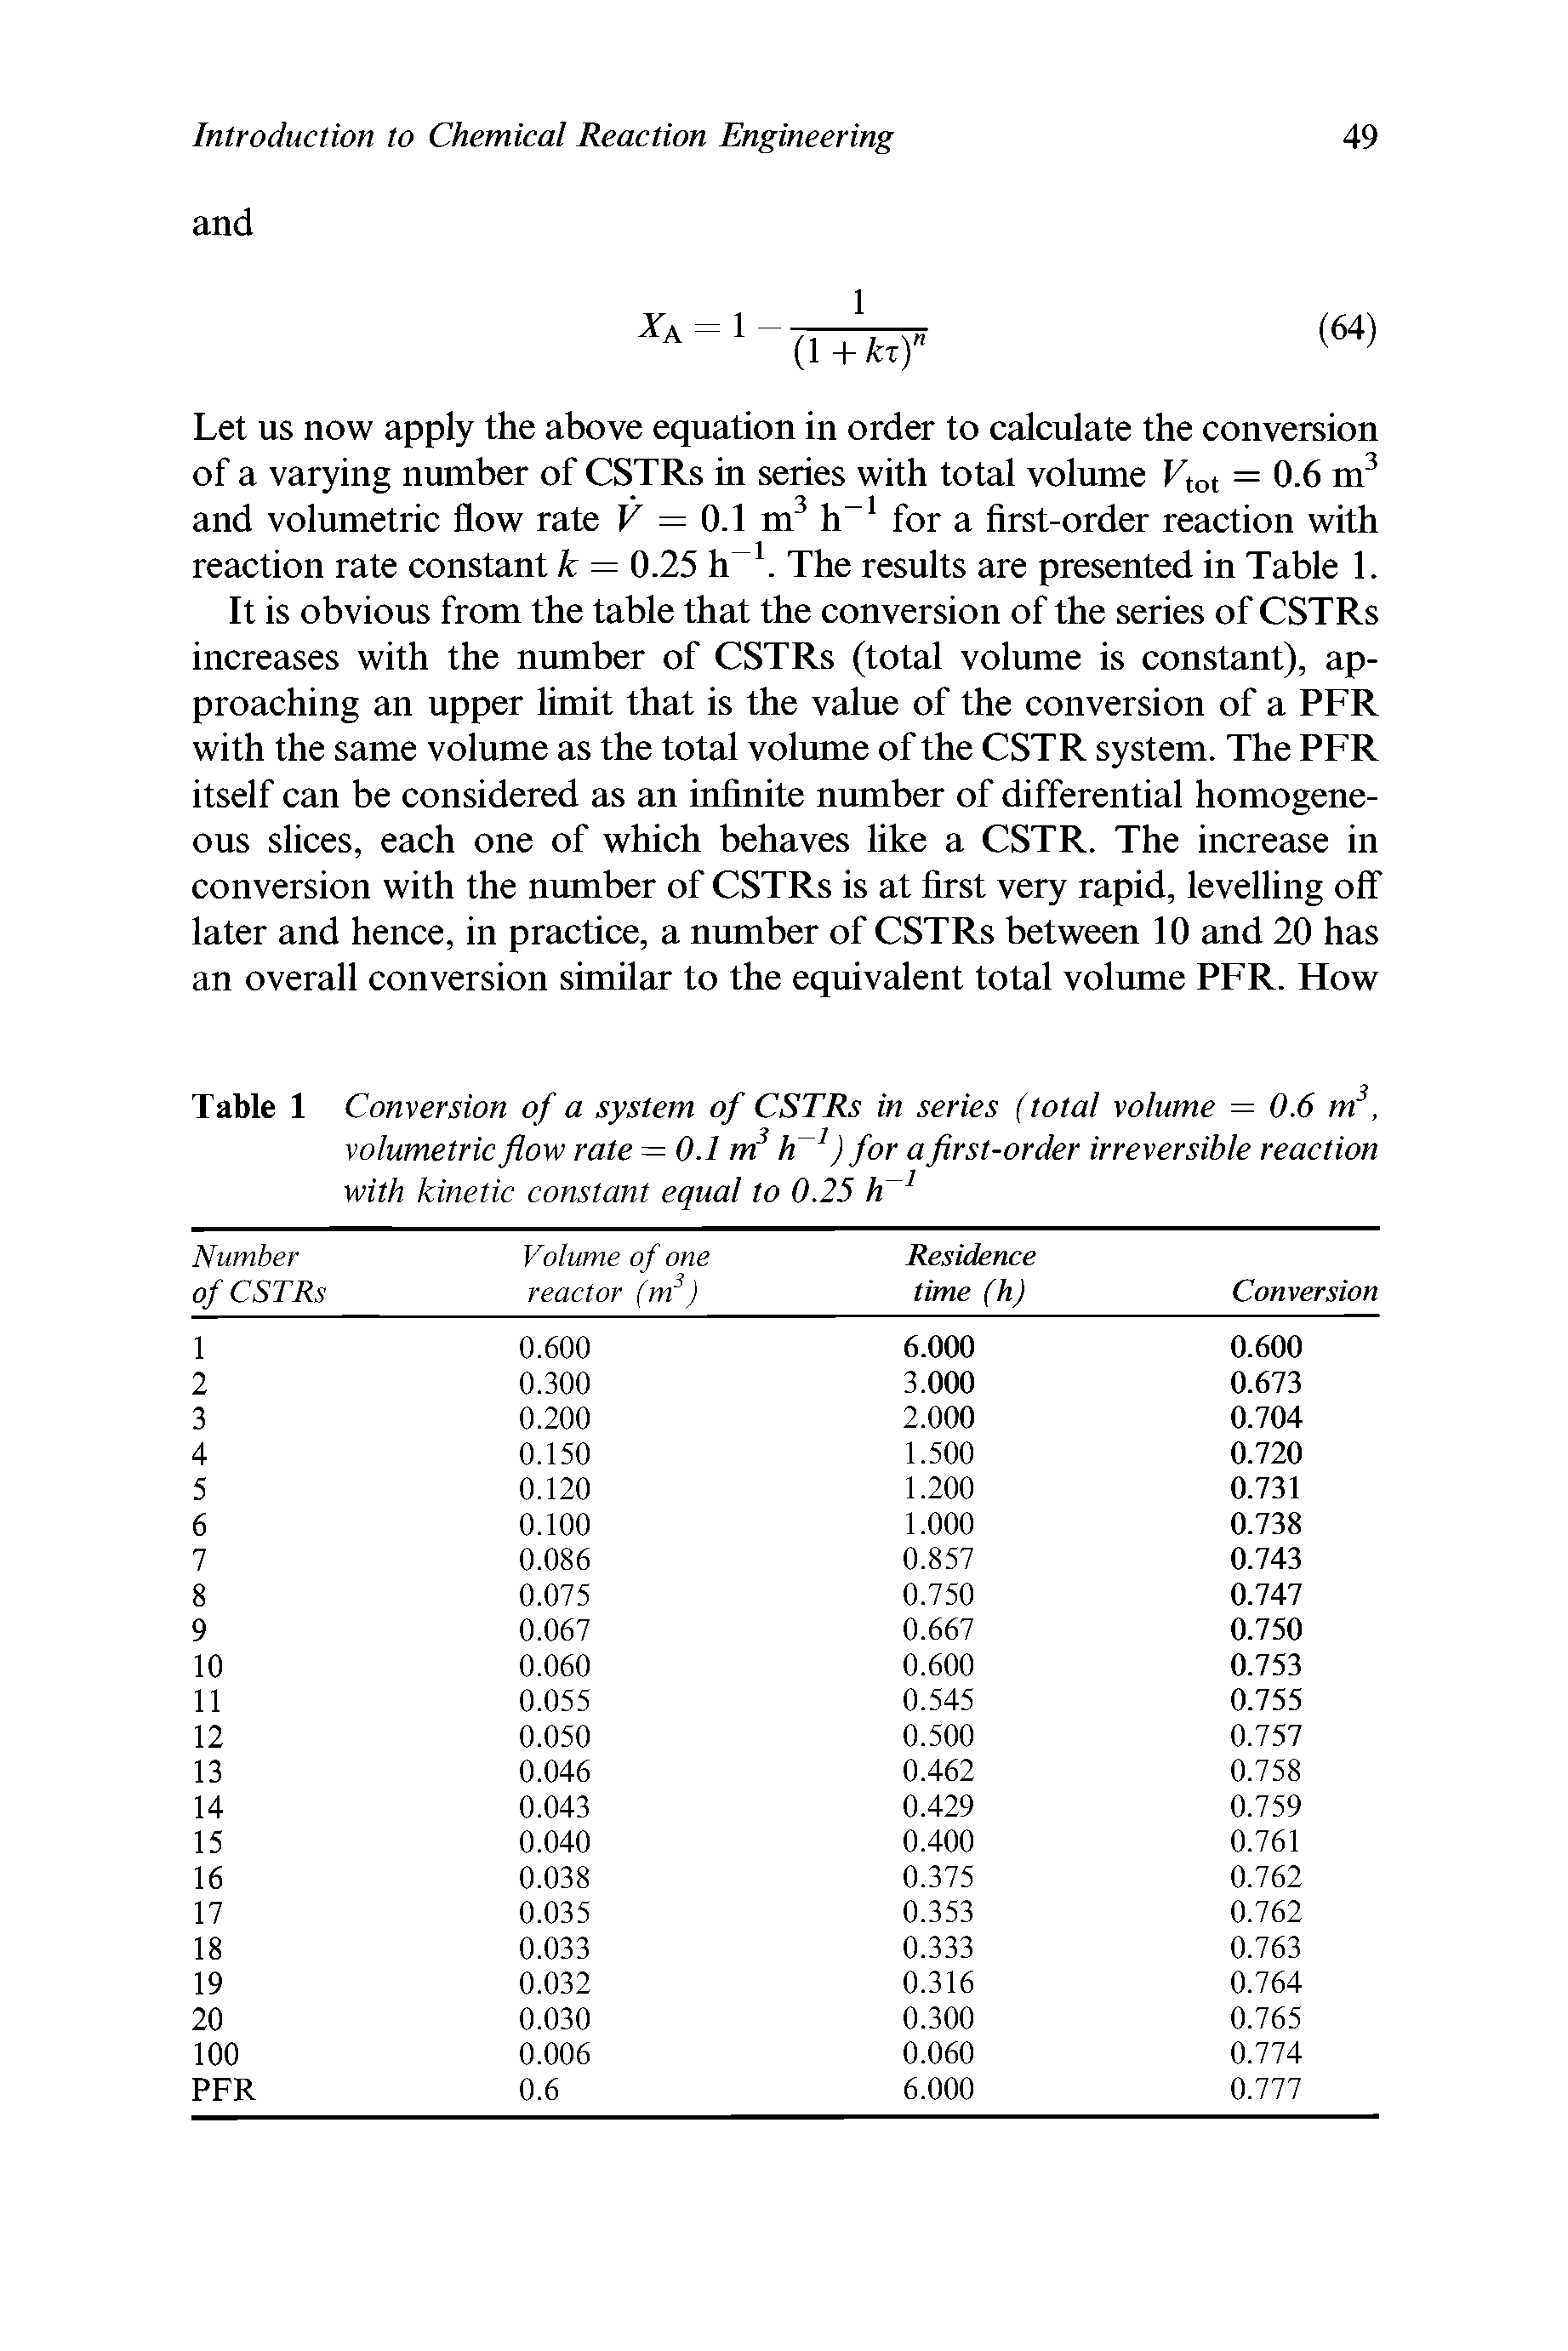 Table 1 Conversion of a system of CSTRs in series (total volume = 0.6 m3, volumetric flow rate = 0.1 m3 h ) for a first-order irreversible reaction with kinetic constant equal to 0.25 h 1...